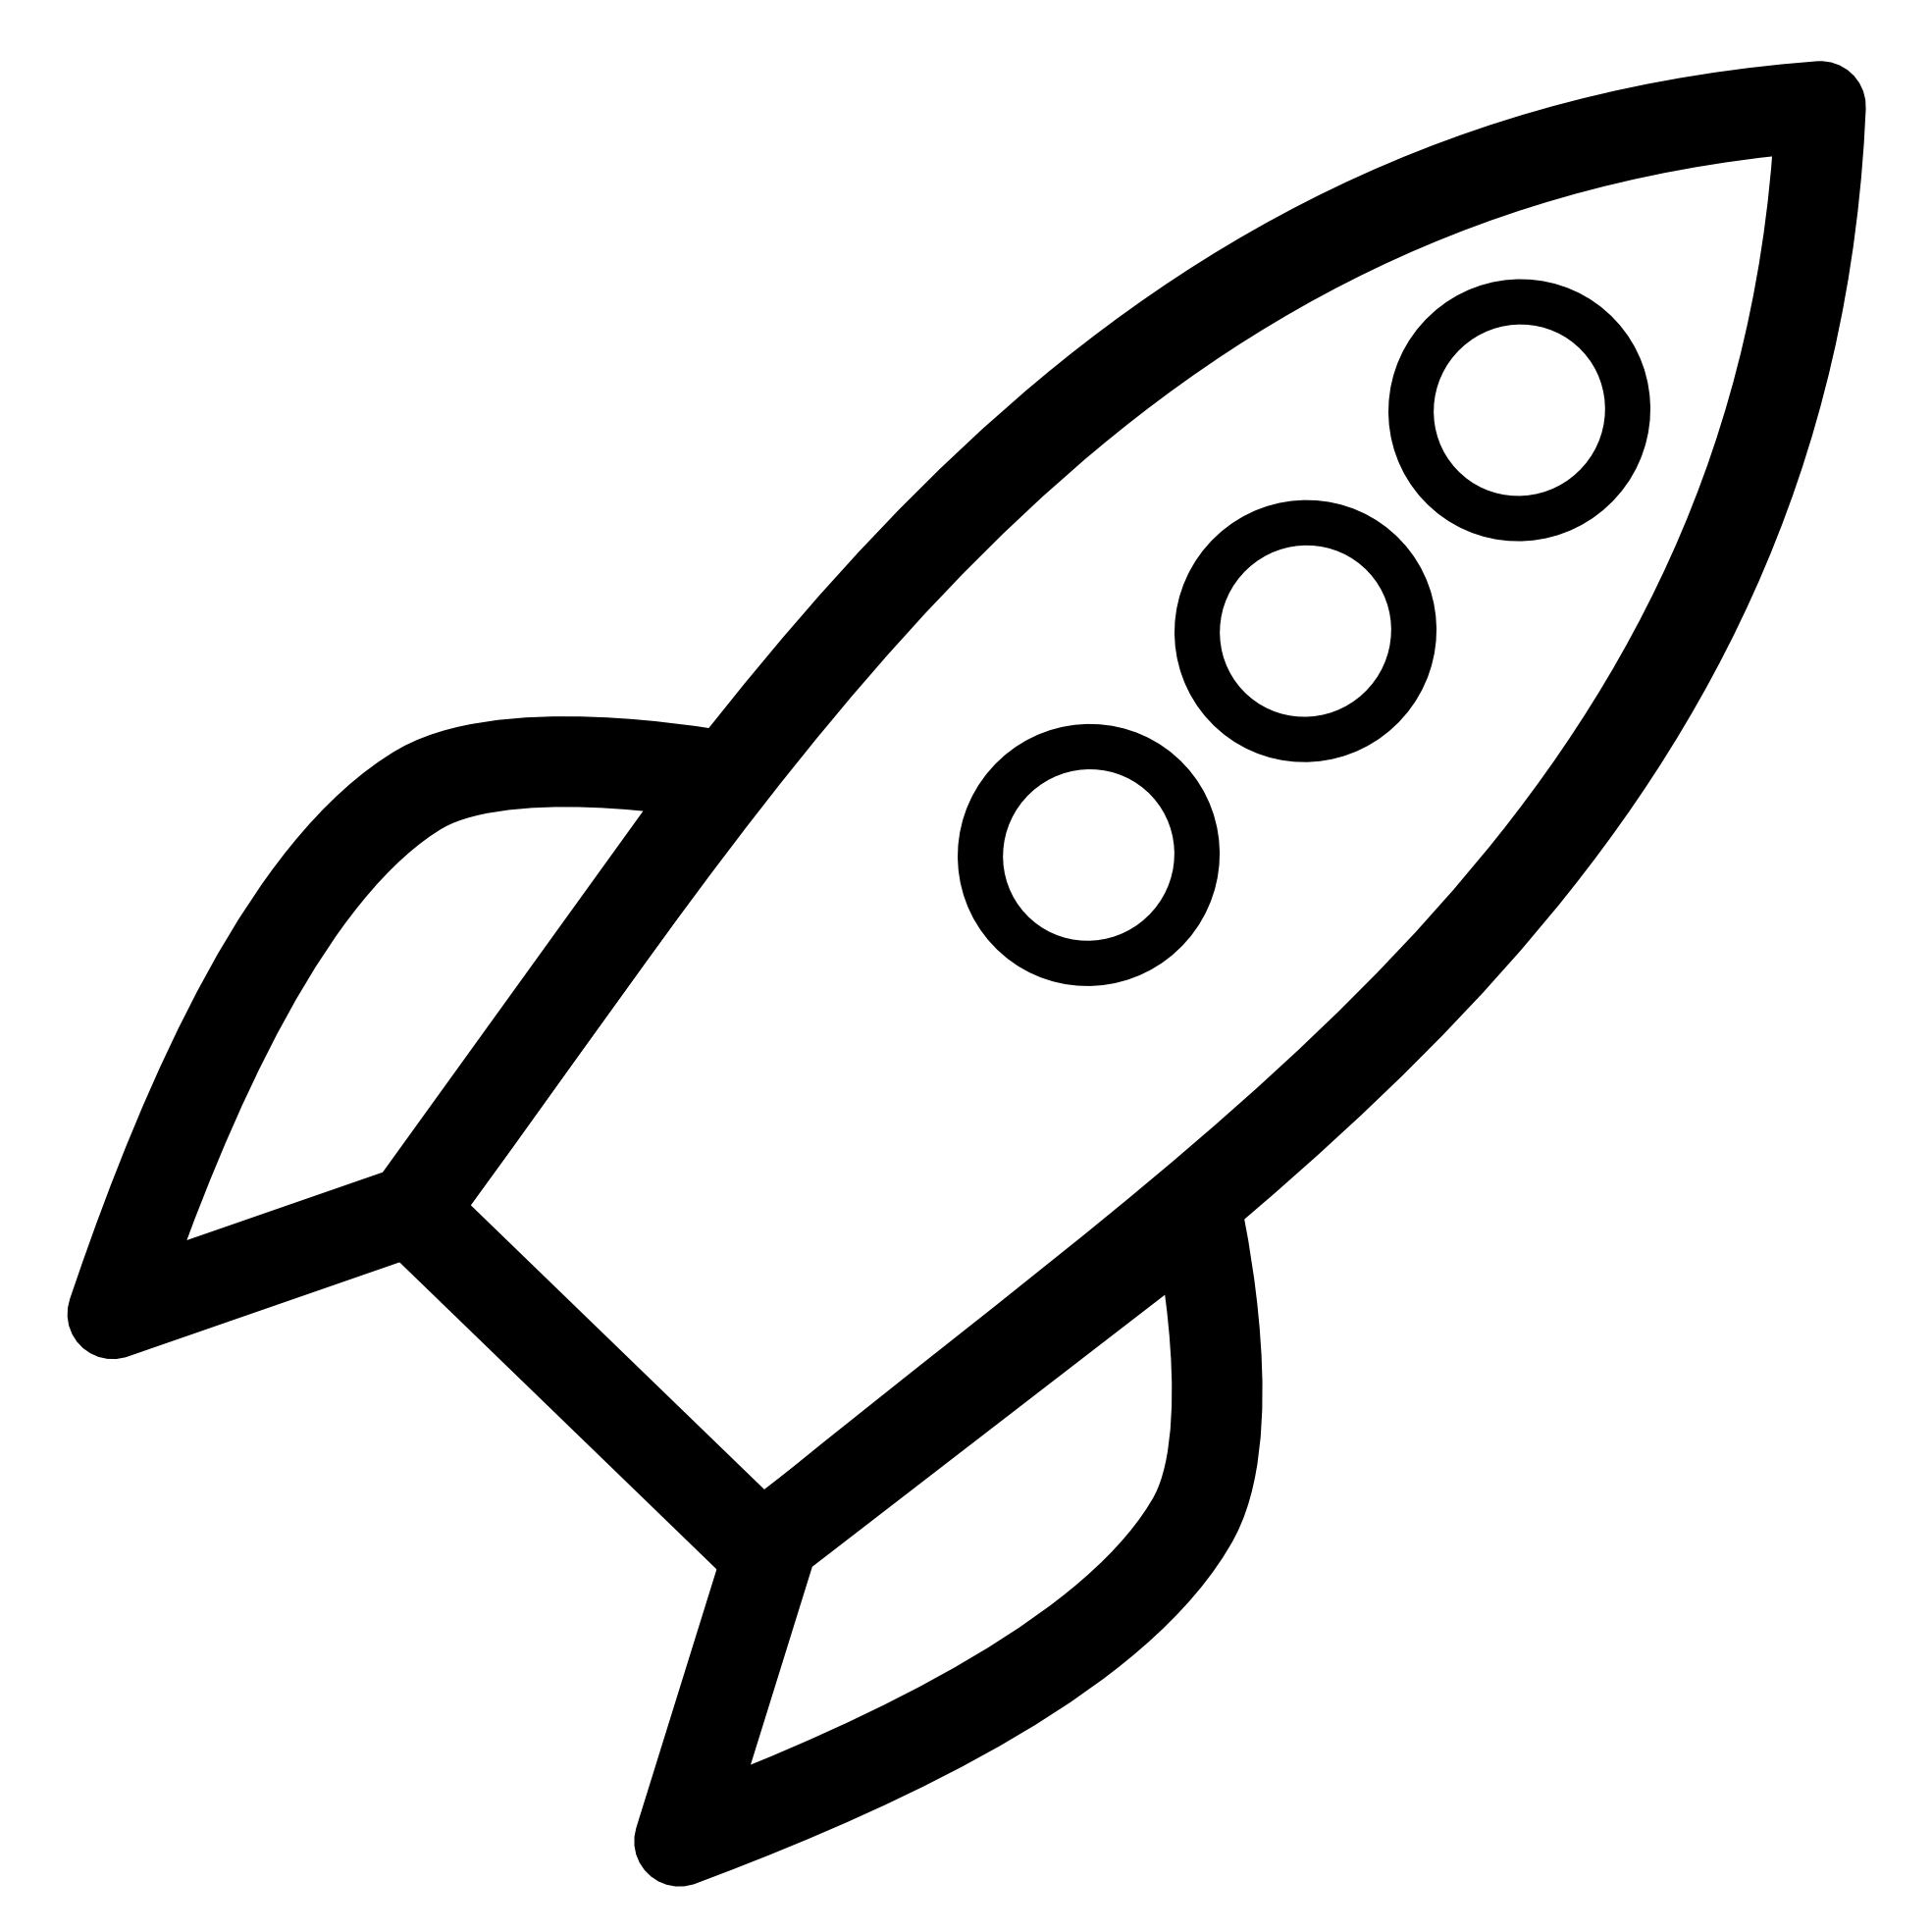 Black and white cpblorce. Universe clipart simple rocket